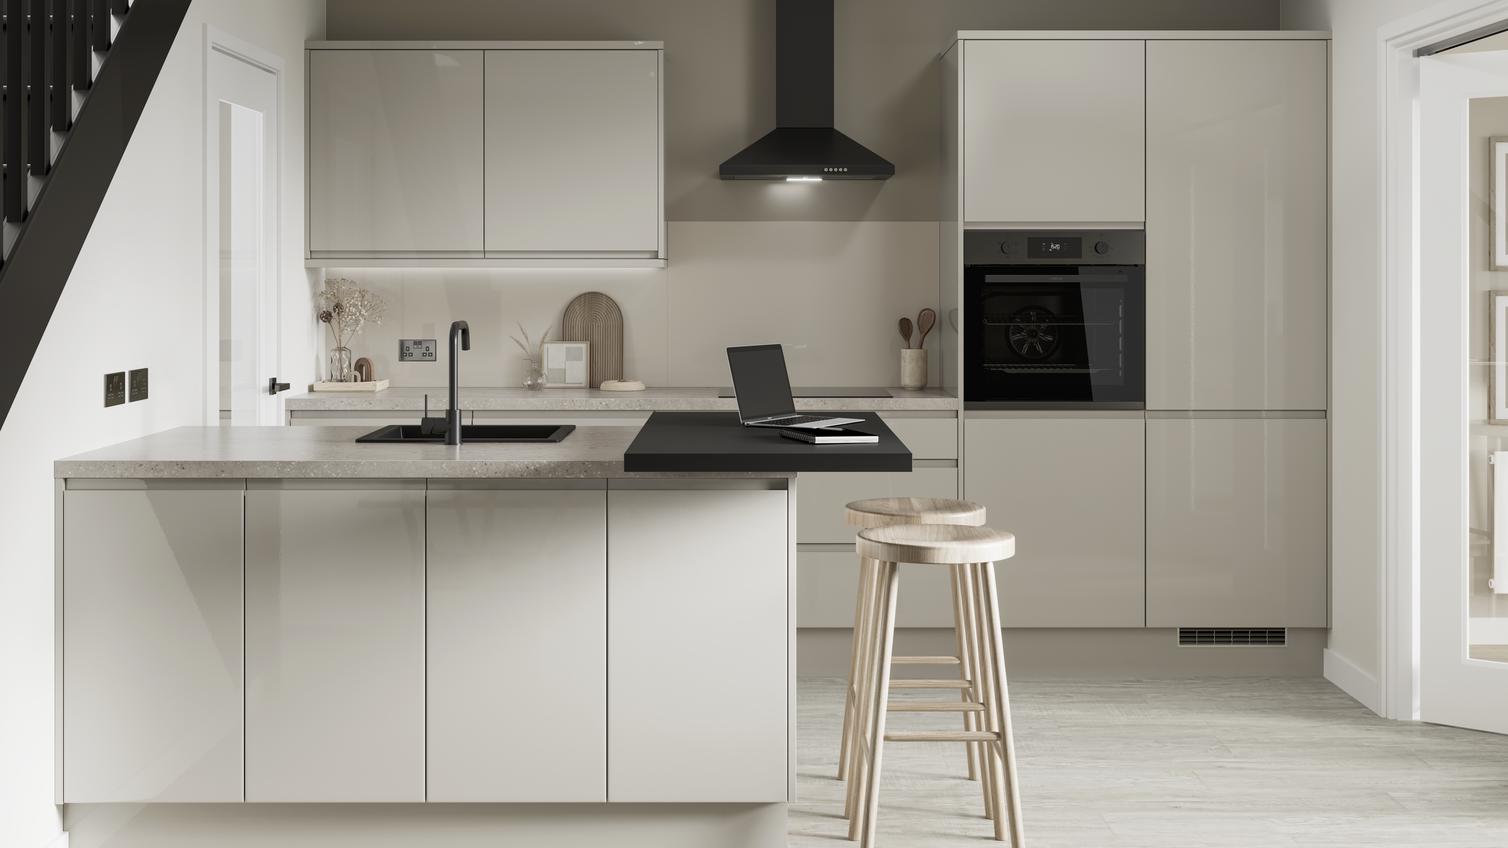 A minimal sandstone kitchen design with gloss, integrated handle doors and matt black features, such as a tap and extractor